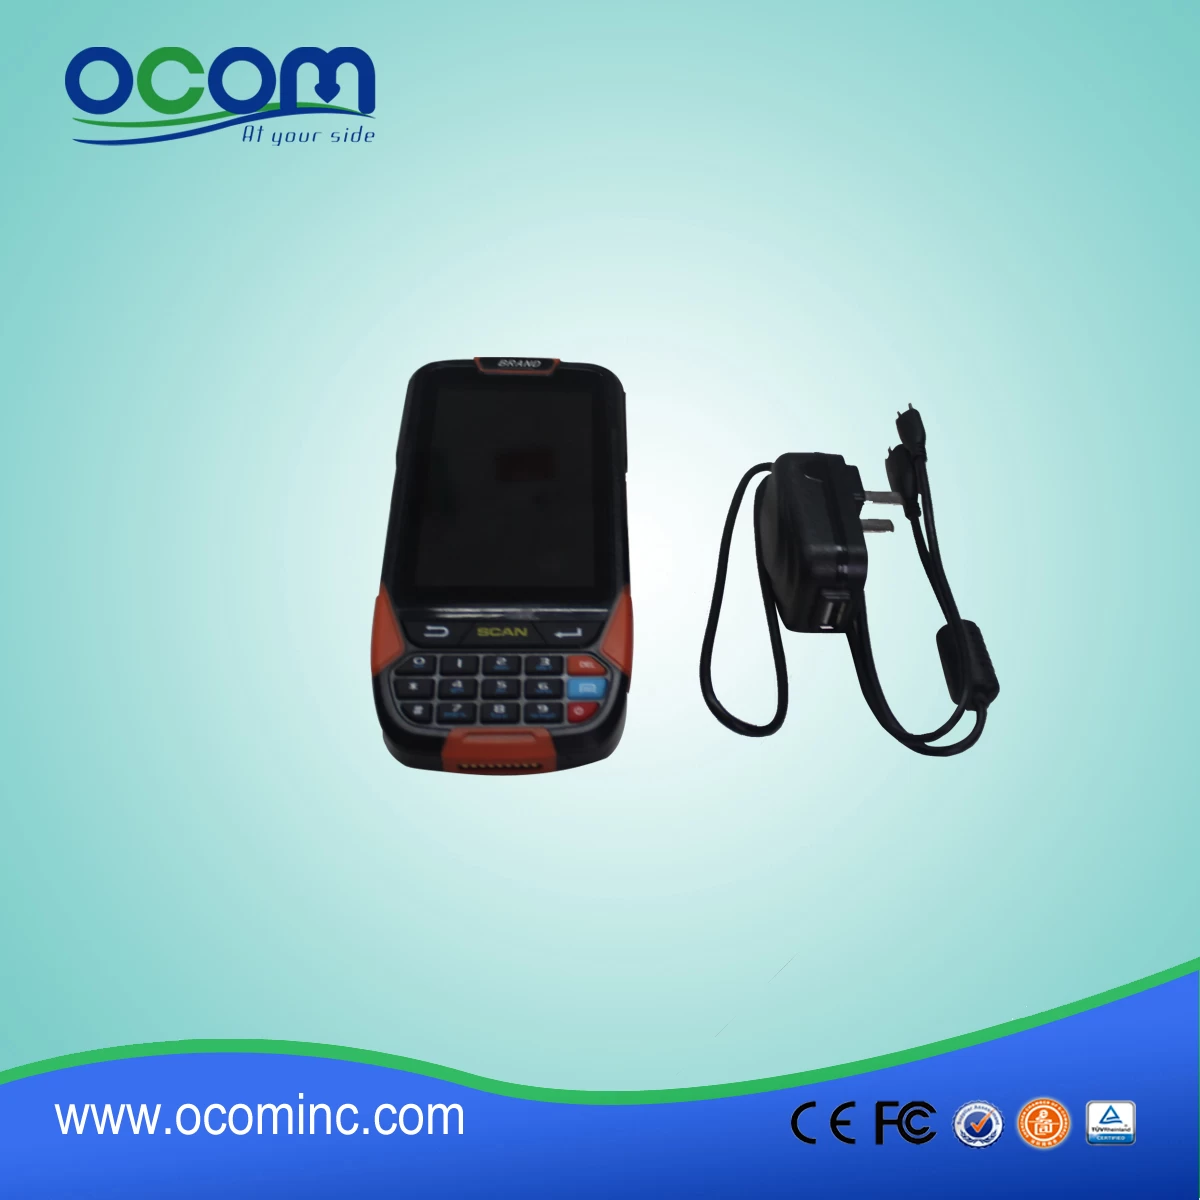 handheld industrial Android pda phone accessories (OCBS-D8000)